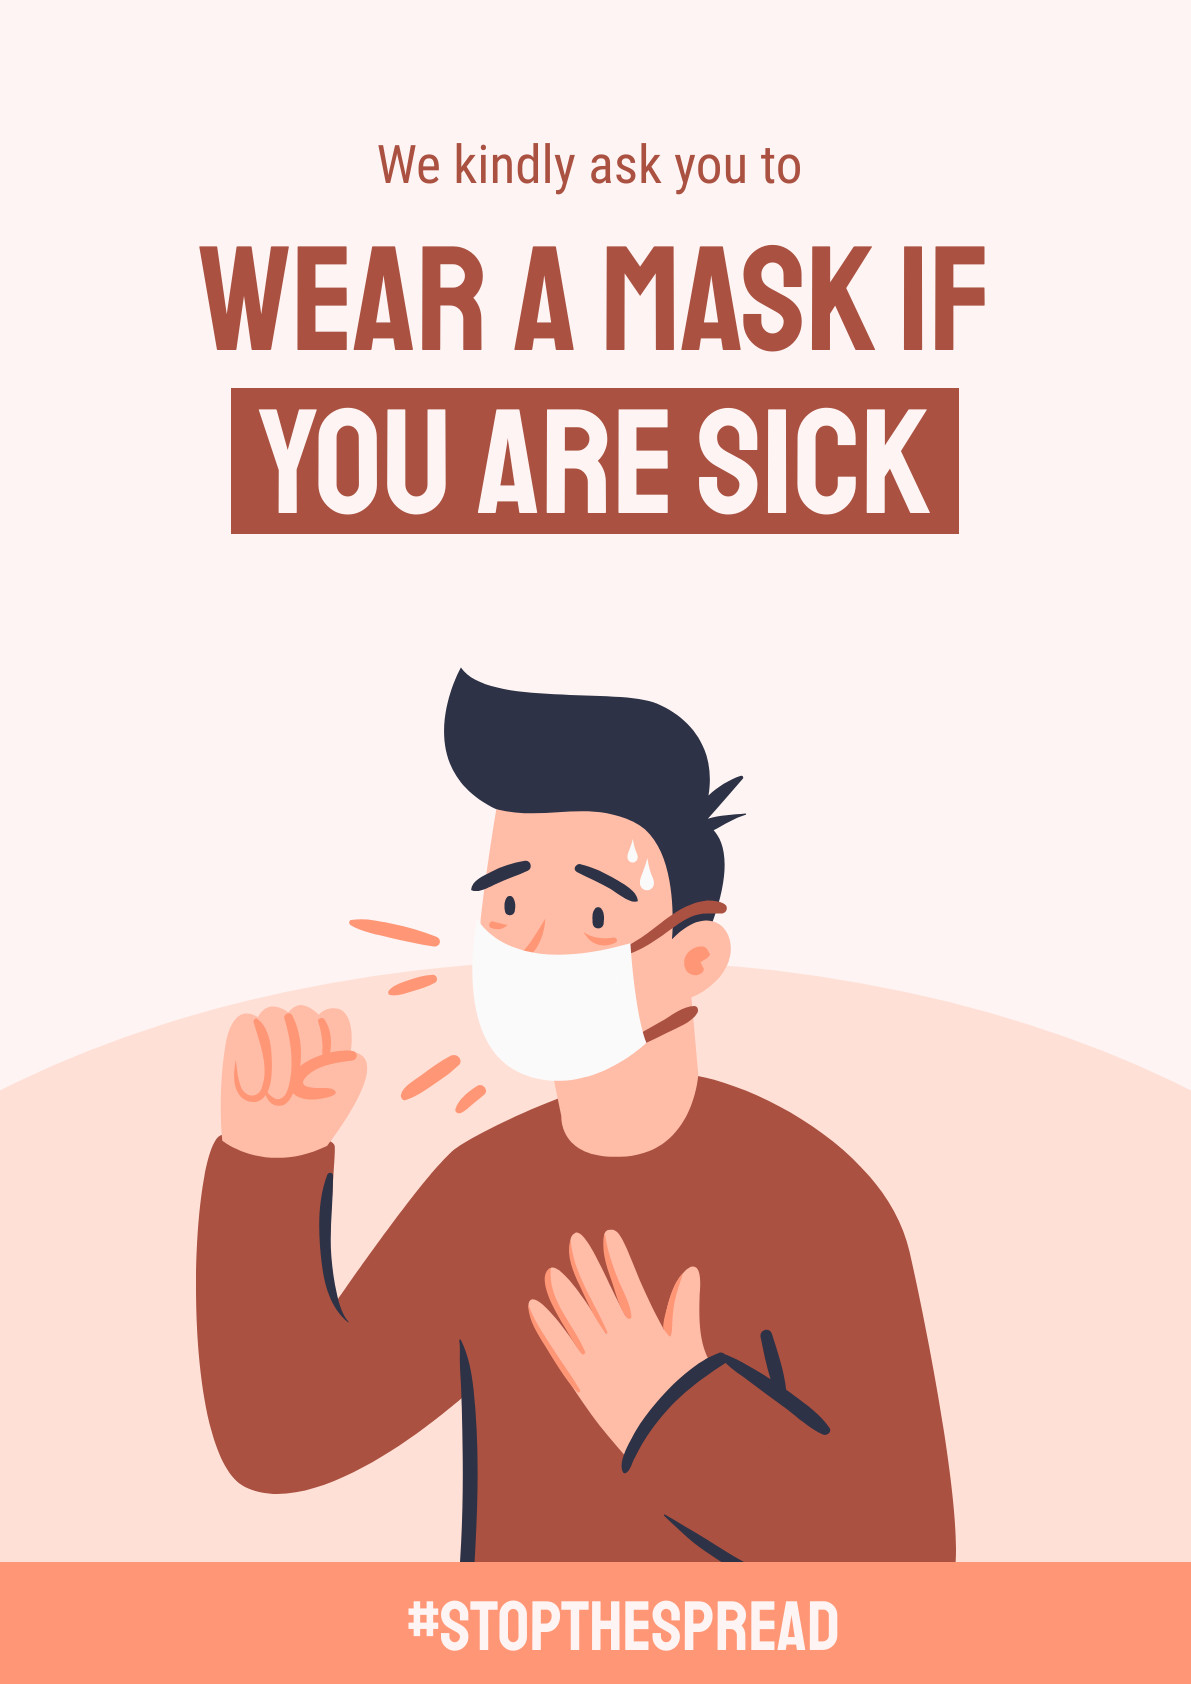 Kindly Wear a Mask Covid19 – Poster Template